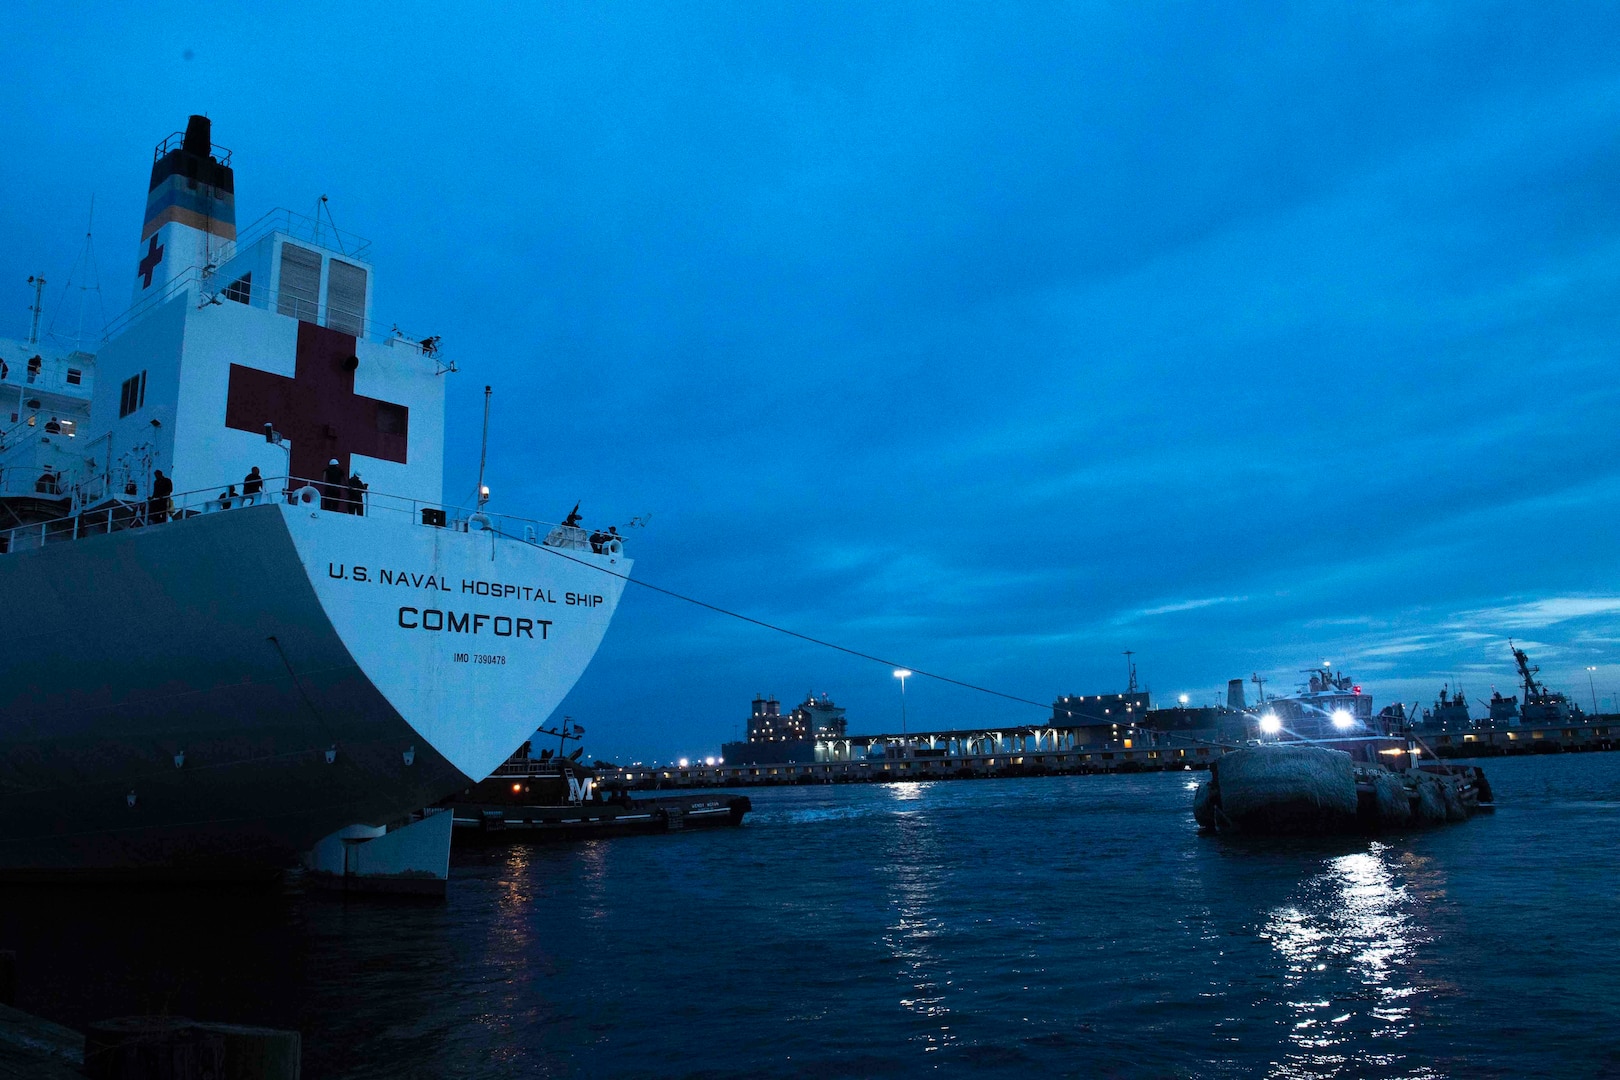 USNS Comfort on 11-week medical support mission to Central and South America as part of U.S. Southern Command’s Enduring Promise initiative, October 10, 2018 (U.S. Navy/Daniel E. Gheesling)